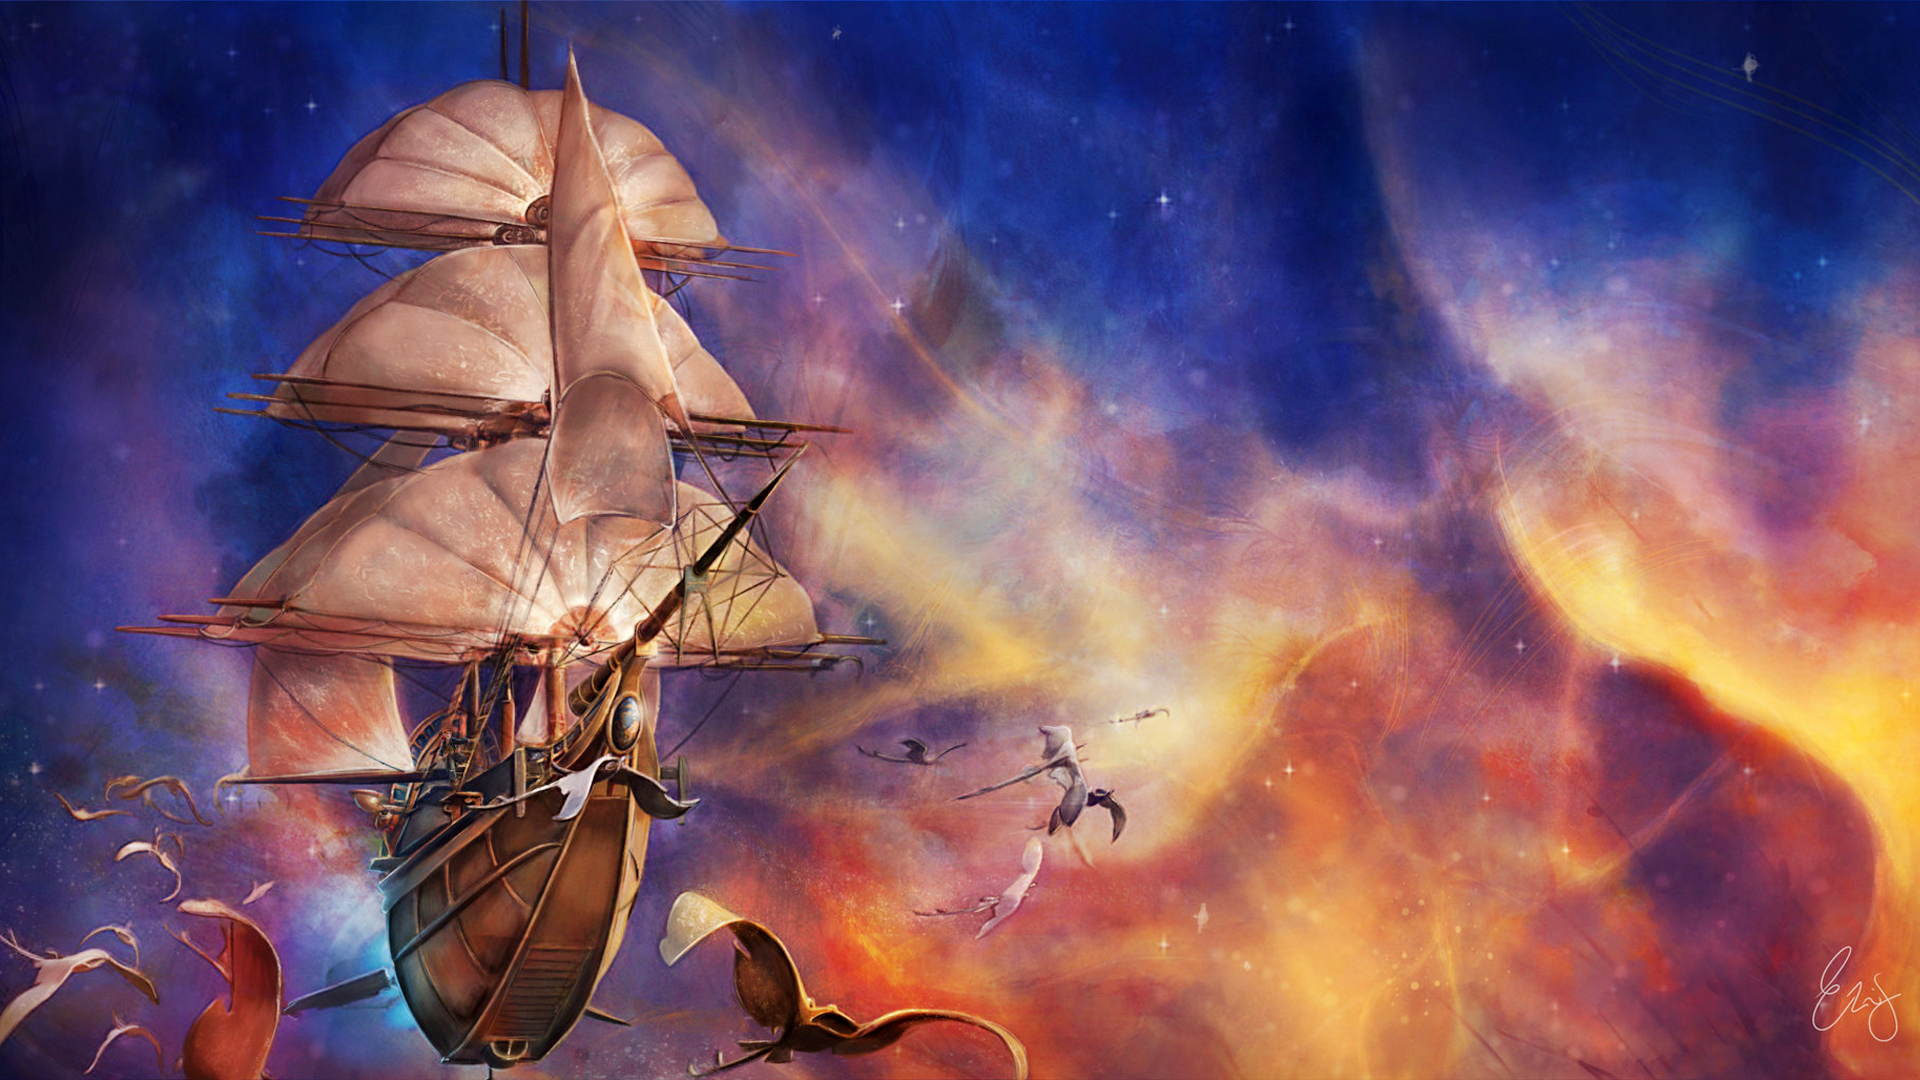 Treasure Planet Disney Space Ship Boat Science Fiction Fantasy Art Flying Space Art Spaceship Steamp 1920x1080